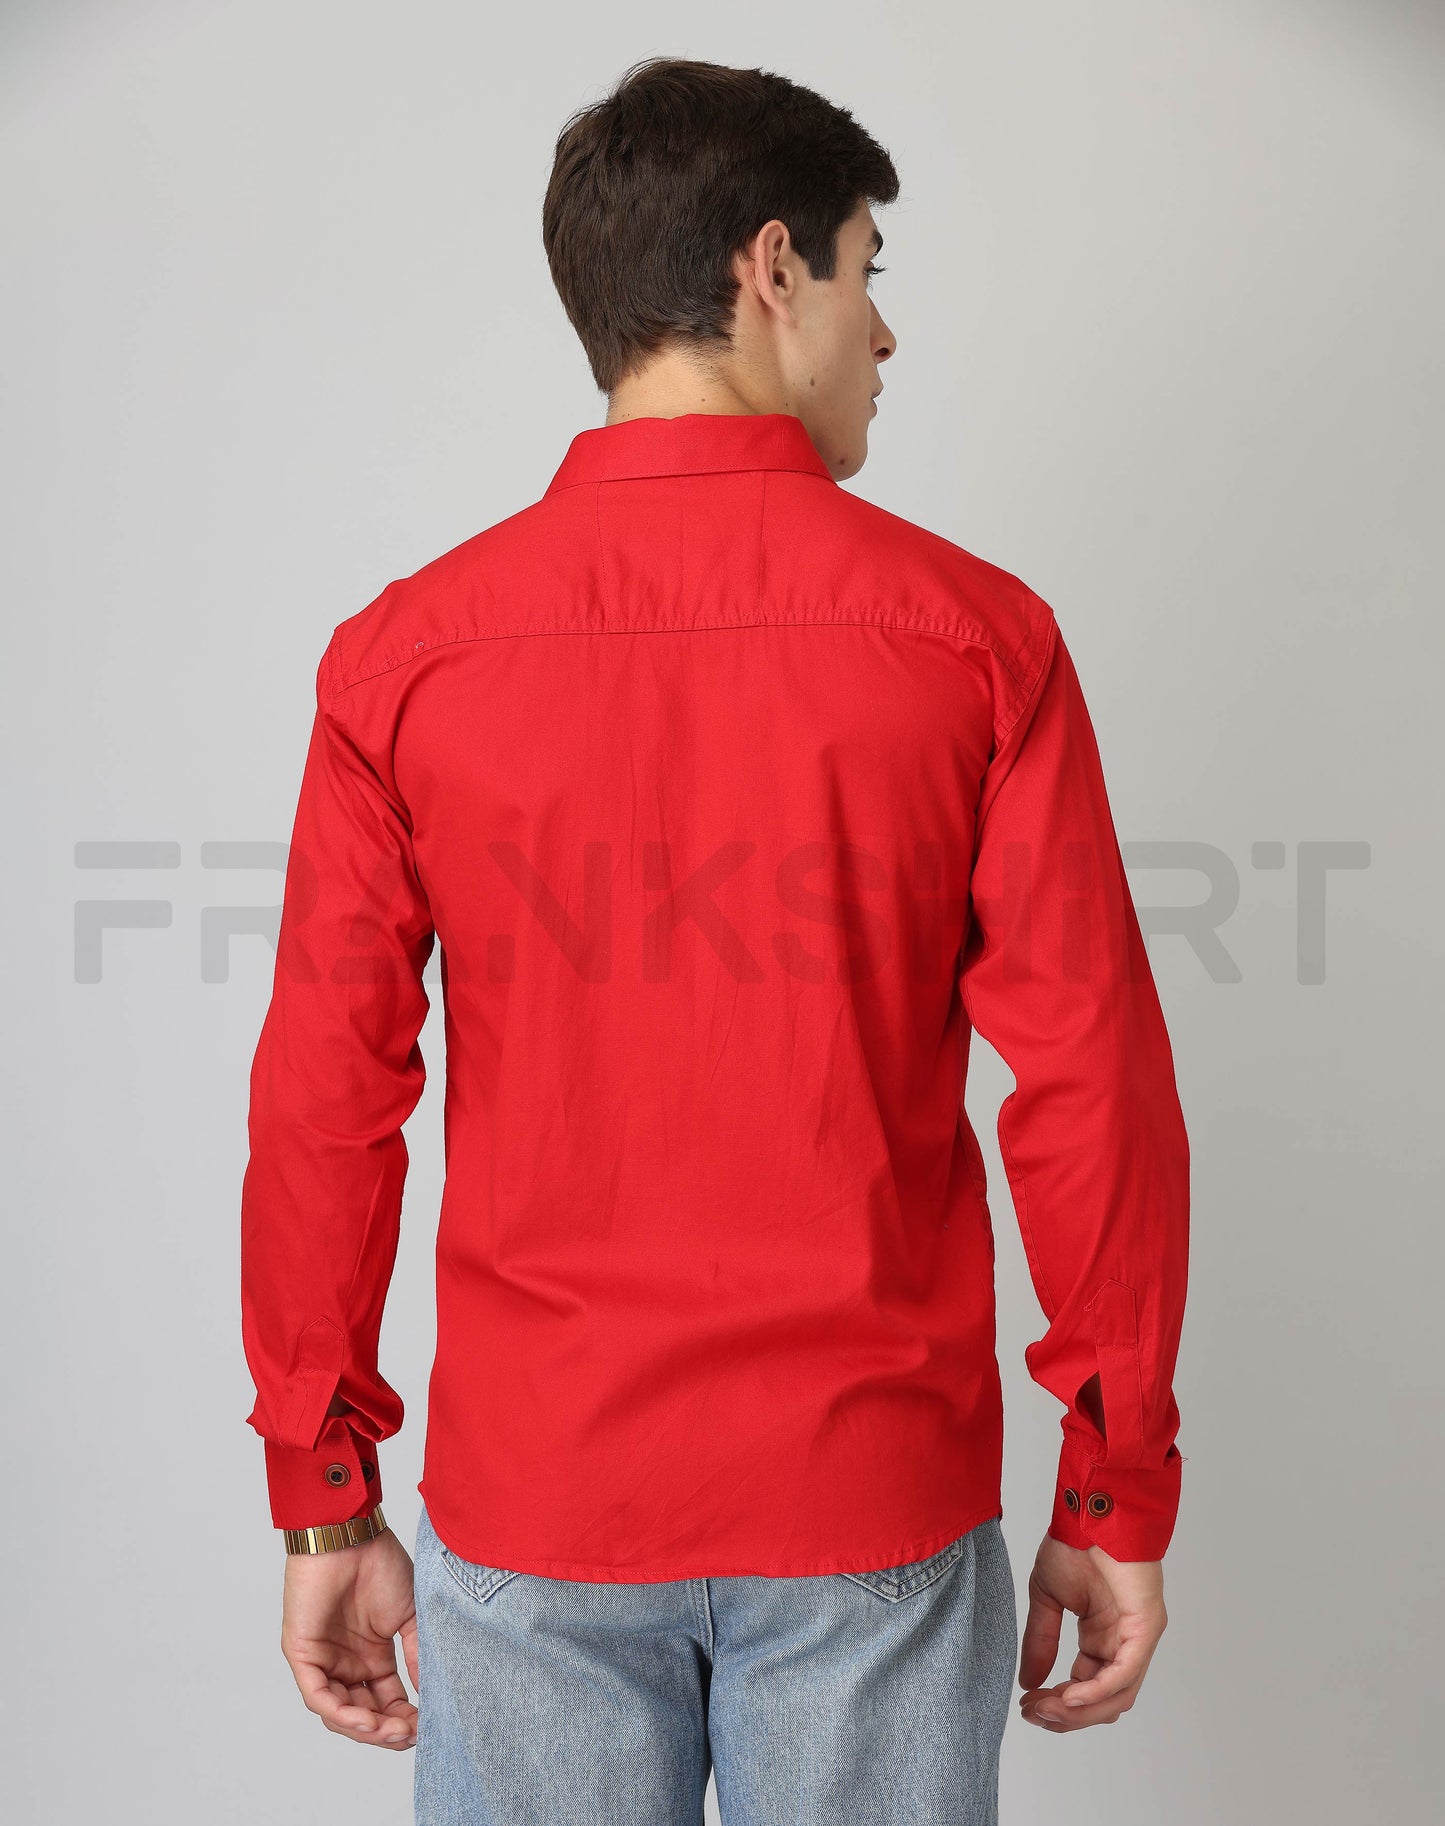 Frankshirt Double Pocket Red Solid Tailored Fit Cotton Casual Shirt for Man